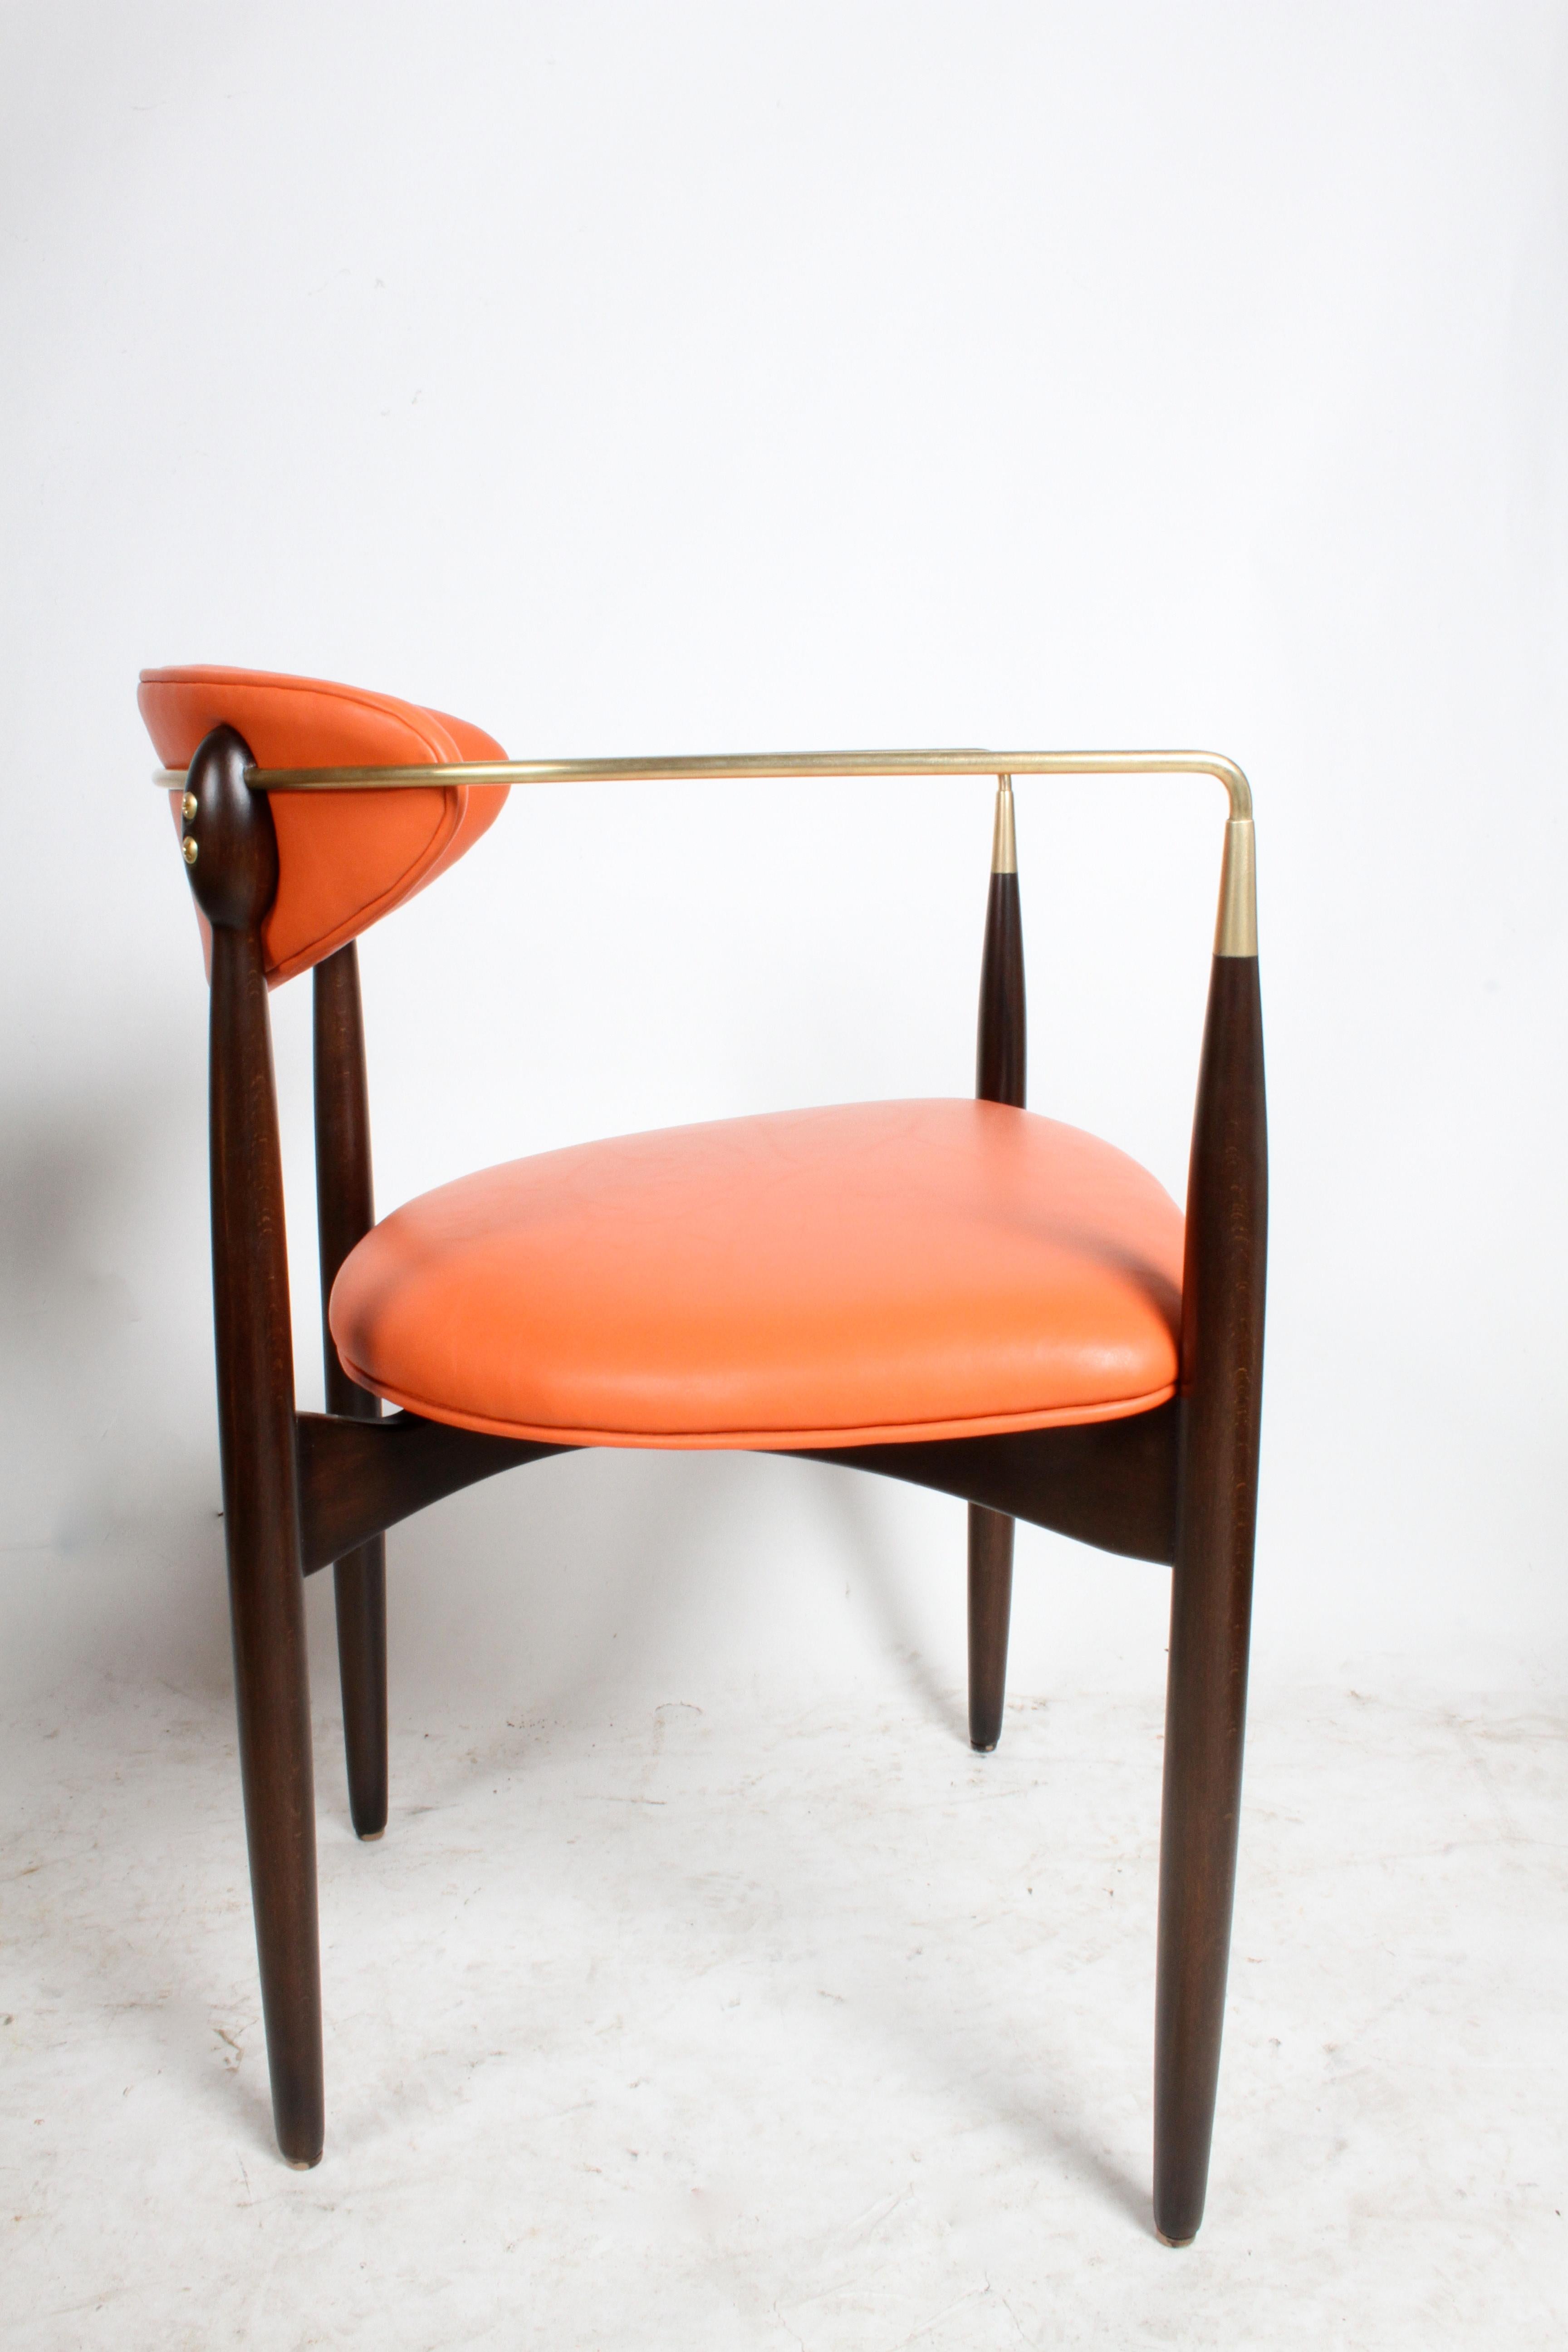 Completely Restored Dan Johnson for Viscount Mid-Century Brass Armchair 1950s In Good Condition For Sale In St. Louis, MO